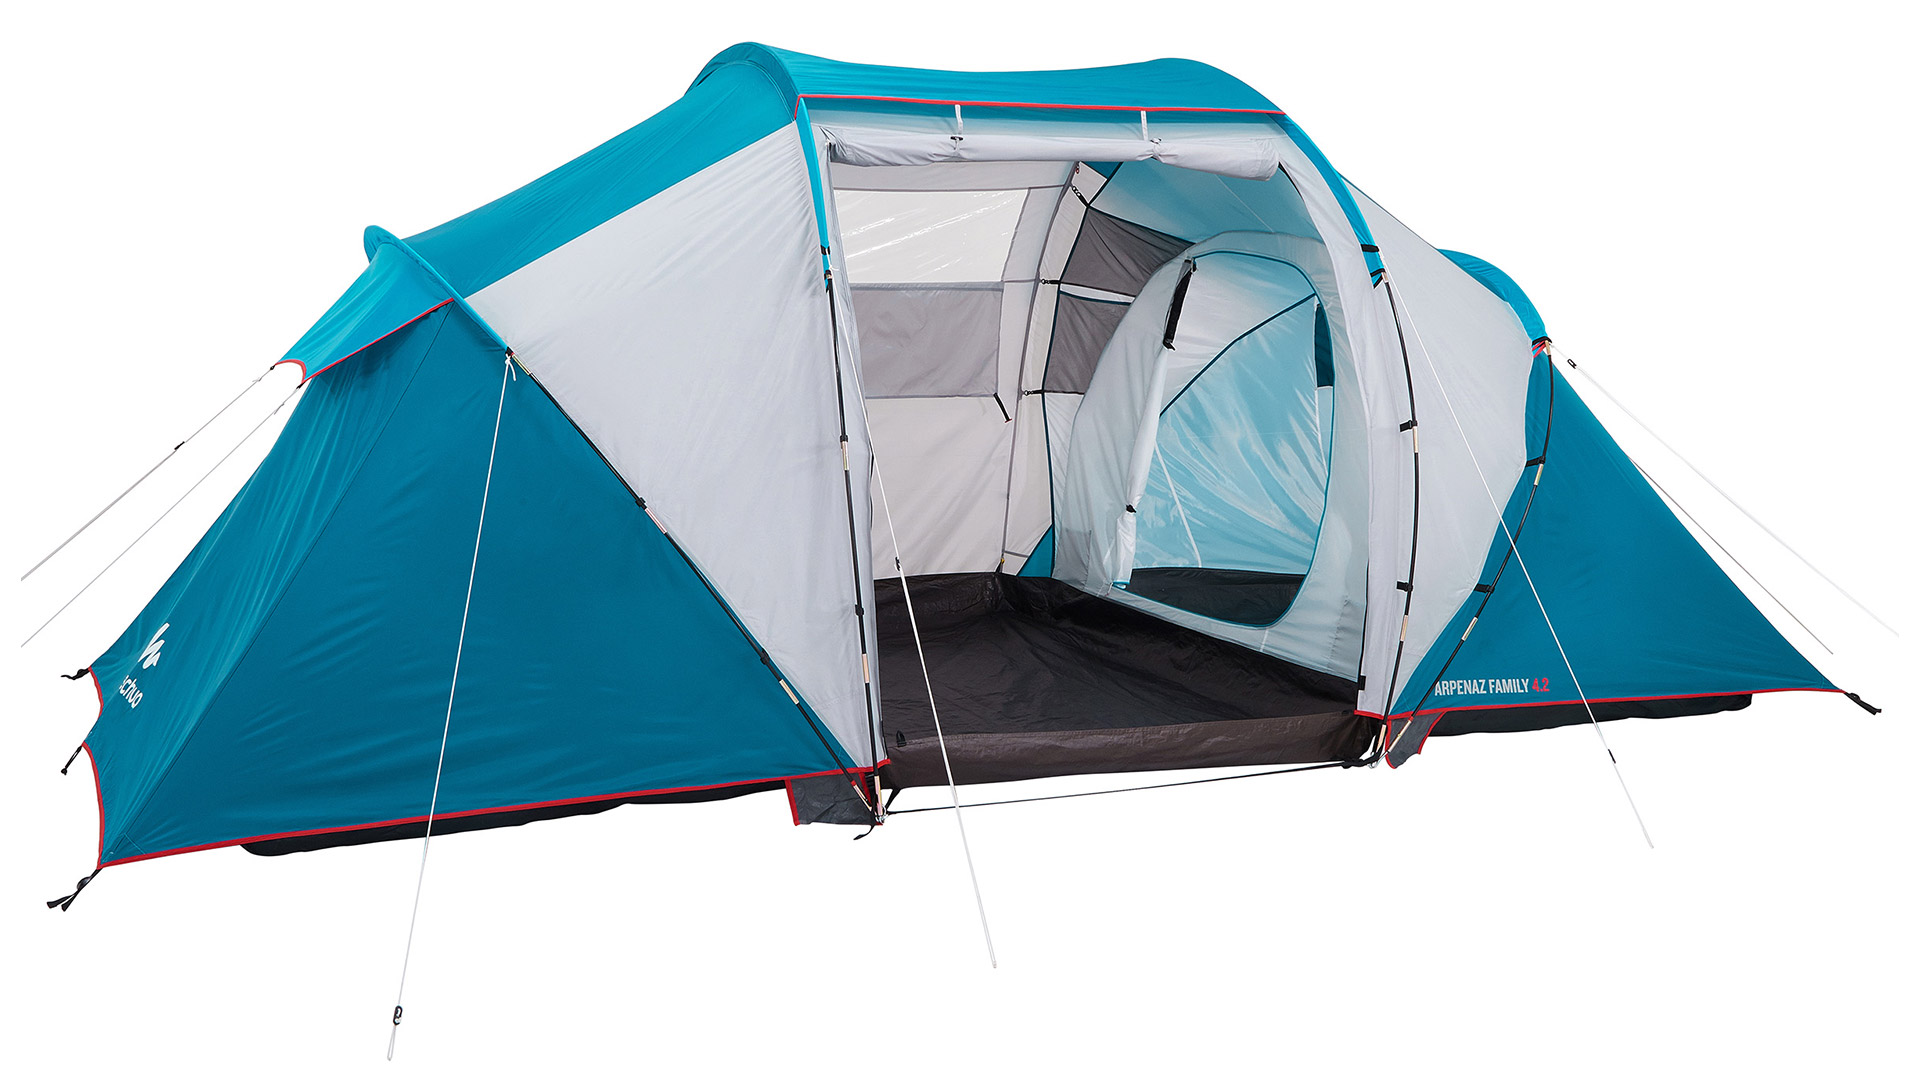 Best tents 2020: for festivals, camping 